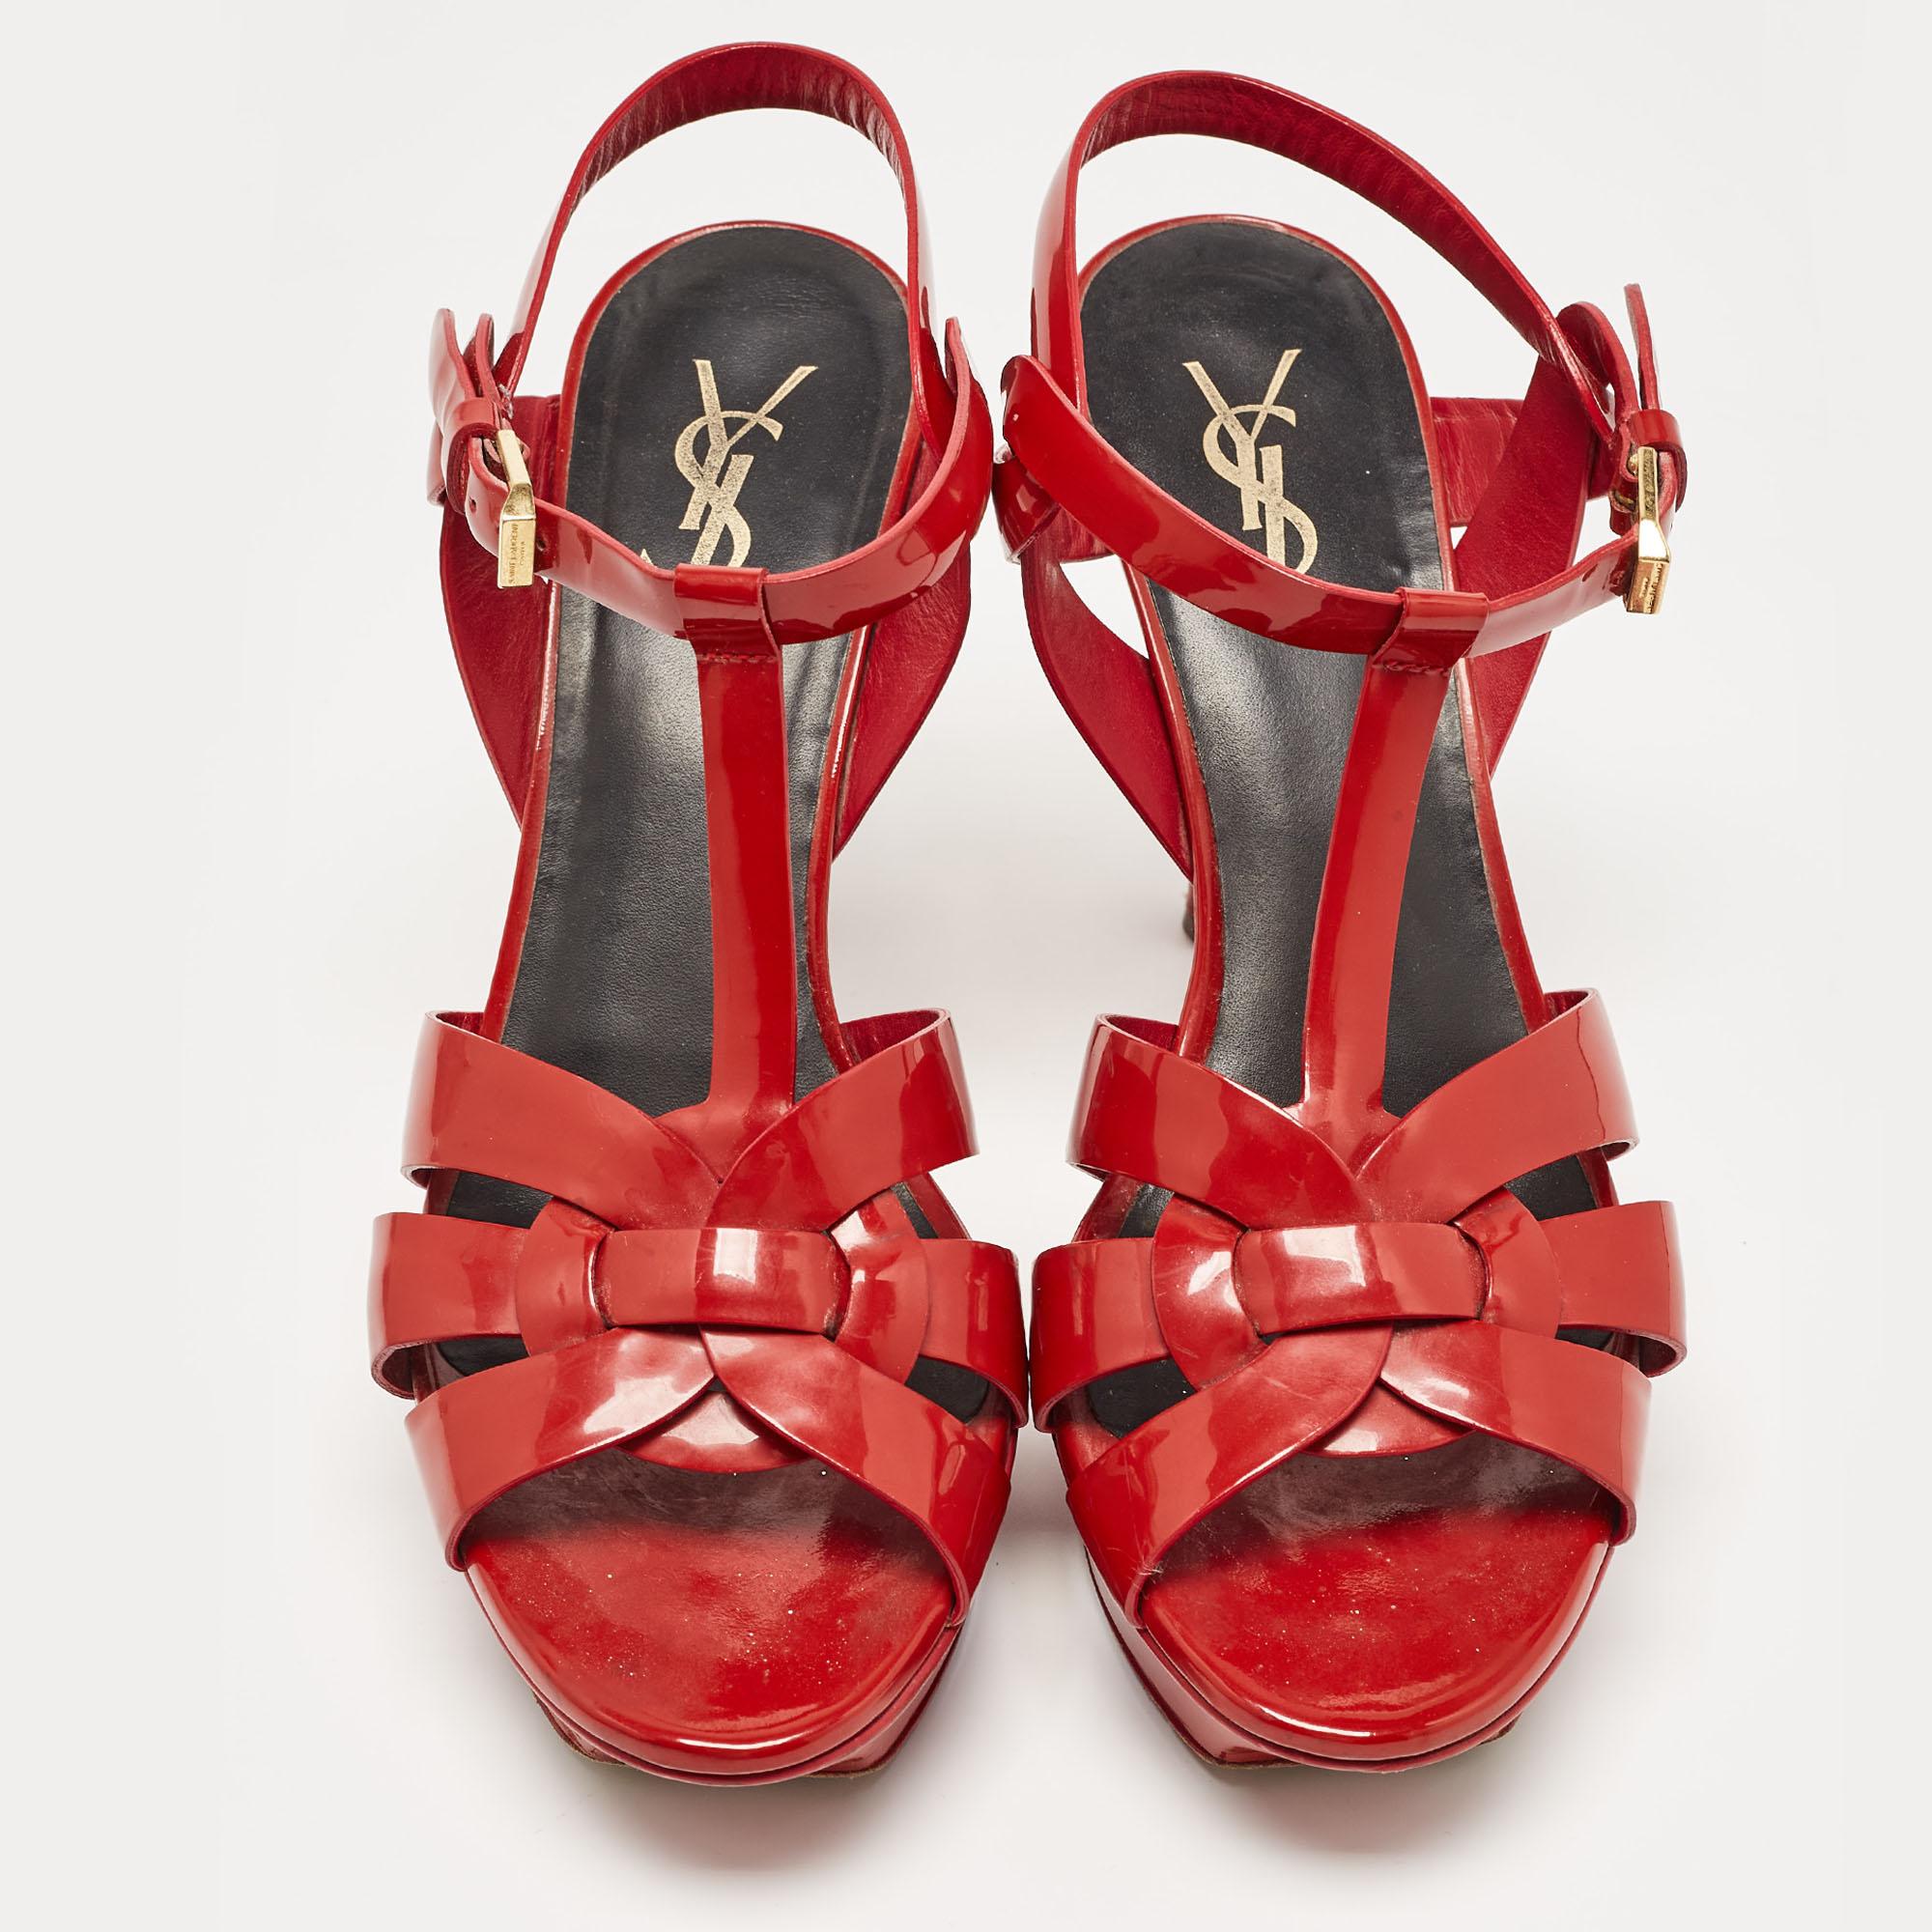 One of the most sought-after designs from Saint Laurent is their Tribute sandals. They are such a craze amongst fashionistas around the world, and it is time you own one yourself. These red ones are designed with leather straps, ankle-buckle